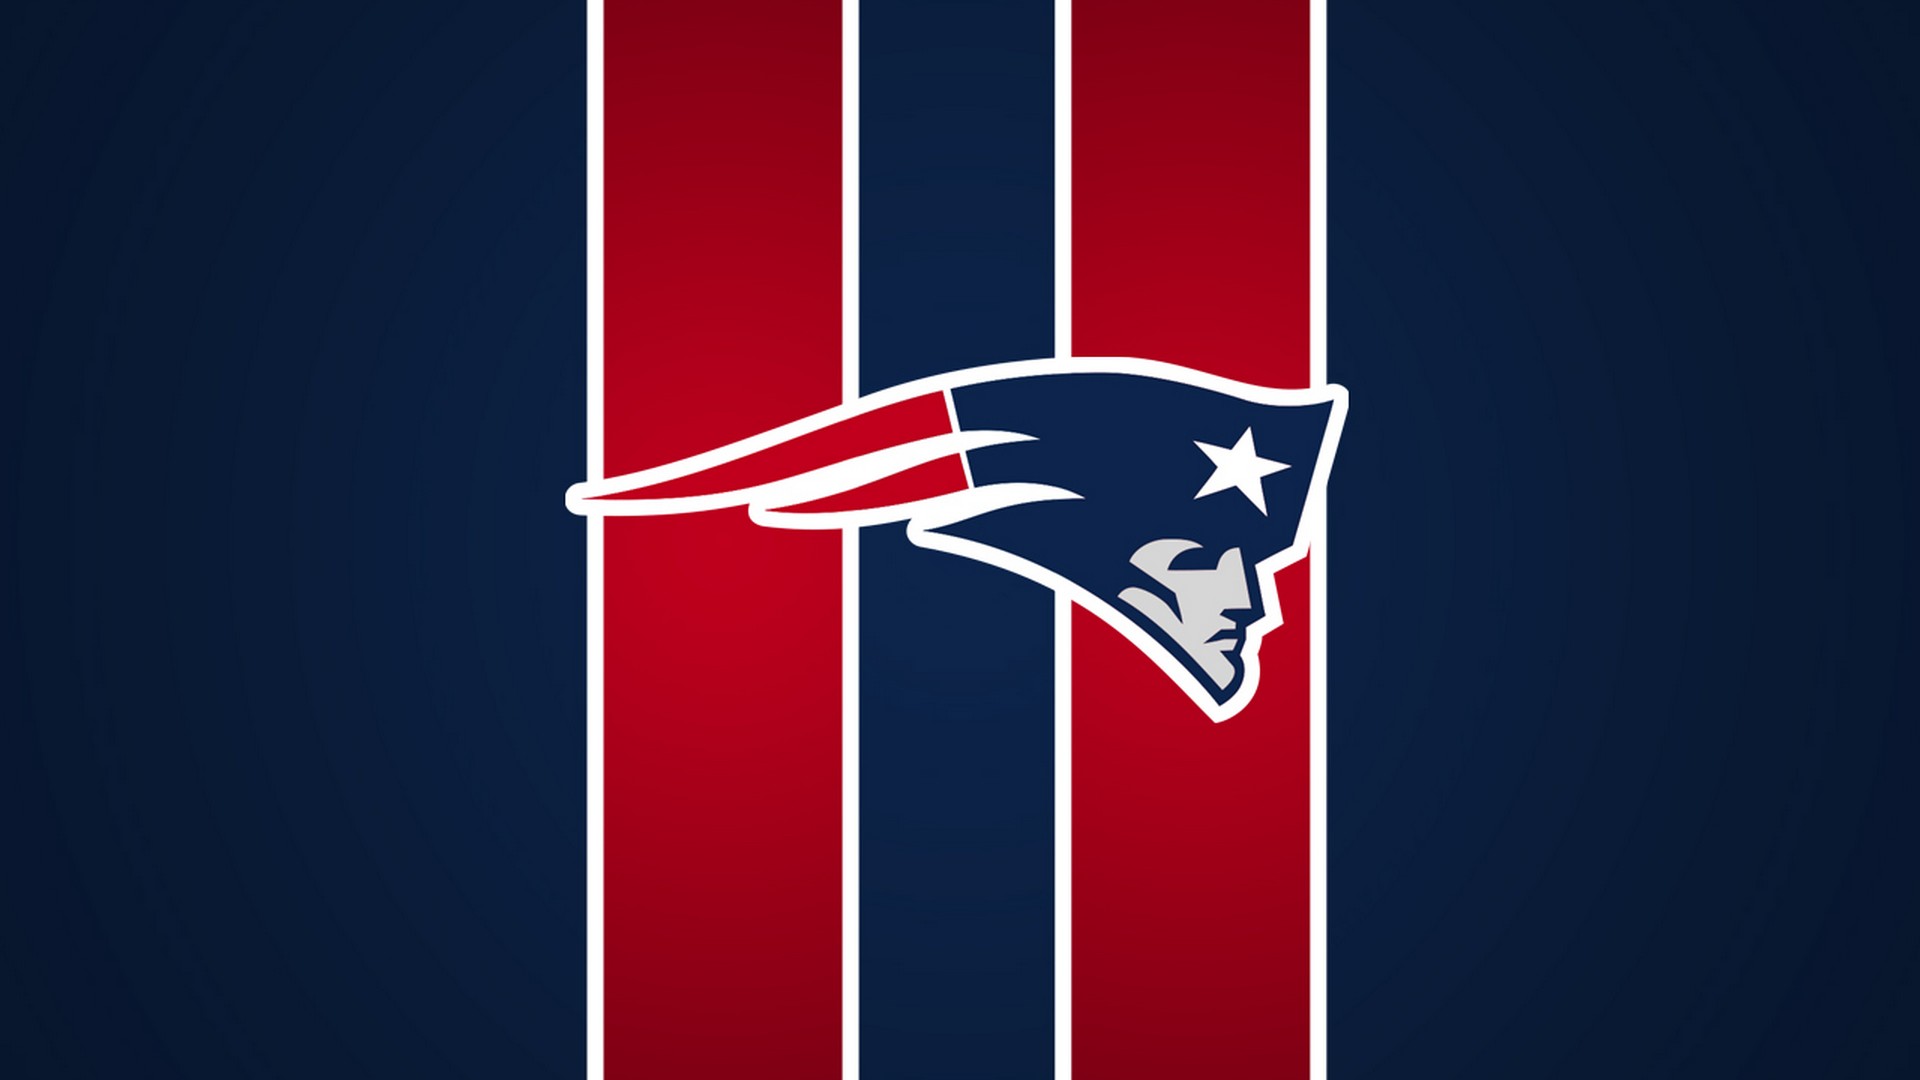 NE Patriots Desktop Wallpapers With Resolution 1920X1080 pixel. You can make this wallpaper for your Mac or Windows Desktop Background, iPhone, Android or Tablet and another Smartphone device for free